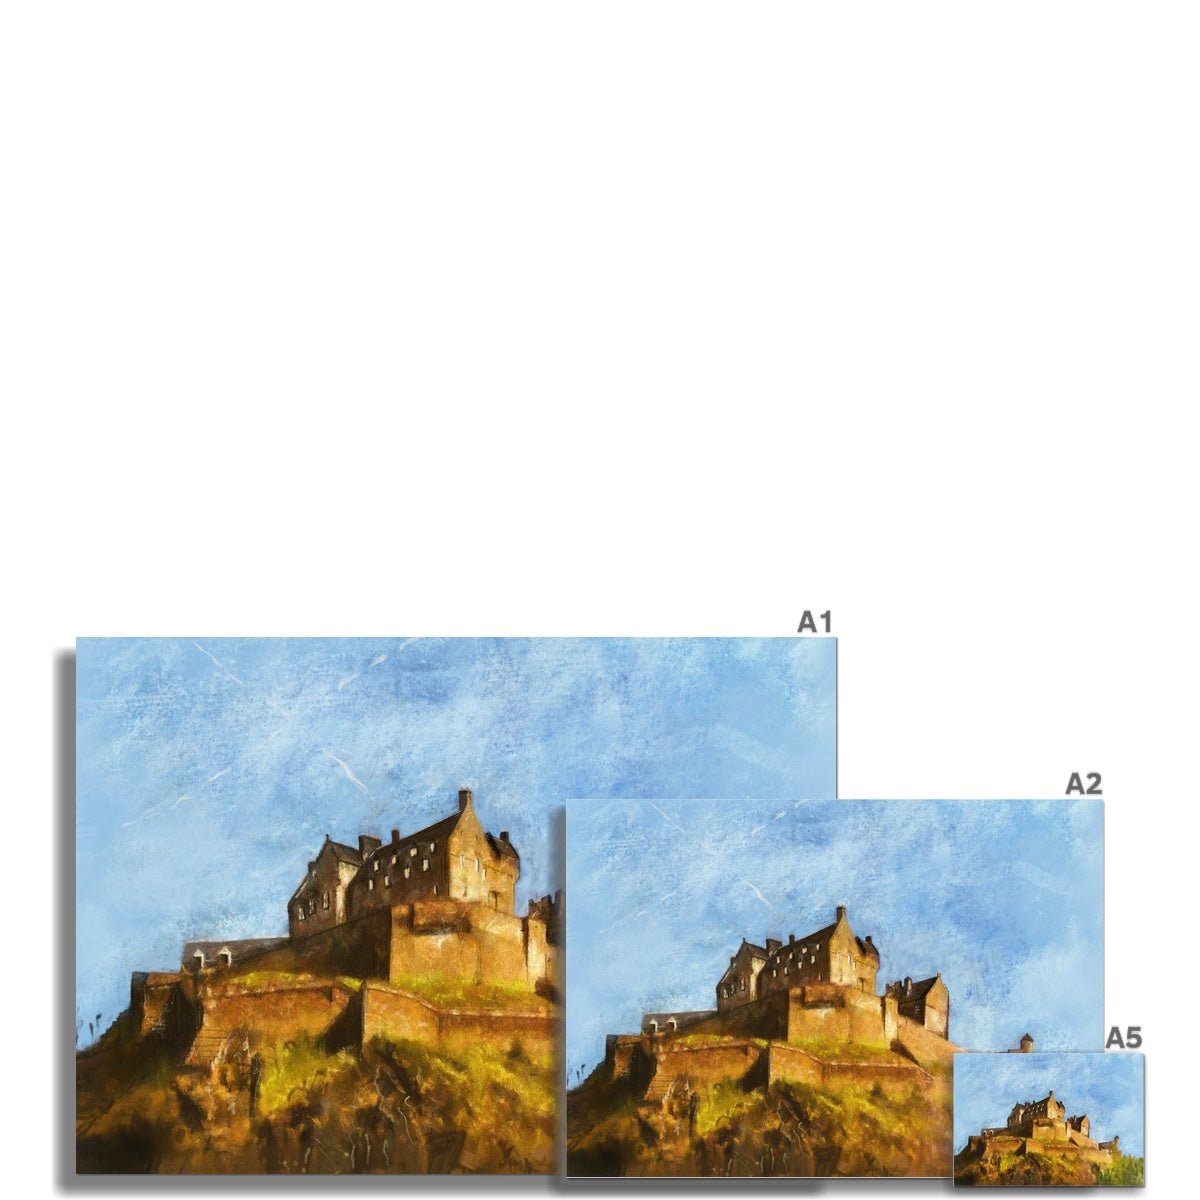 Edinburgh Castle Painting | Fine Art Prints From Scotland-Unframed Prints-Historic & Iconic Scotland Art Gallery-Paintings, Prints, Homeware, Art Gifts From Scotland By Scottish Artist Kevin Hunter